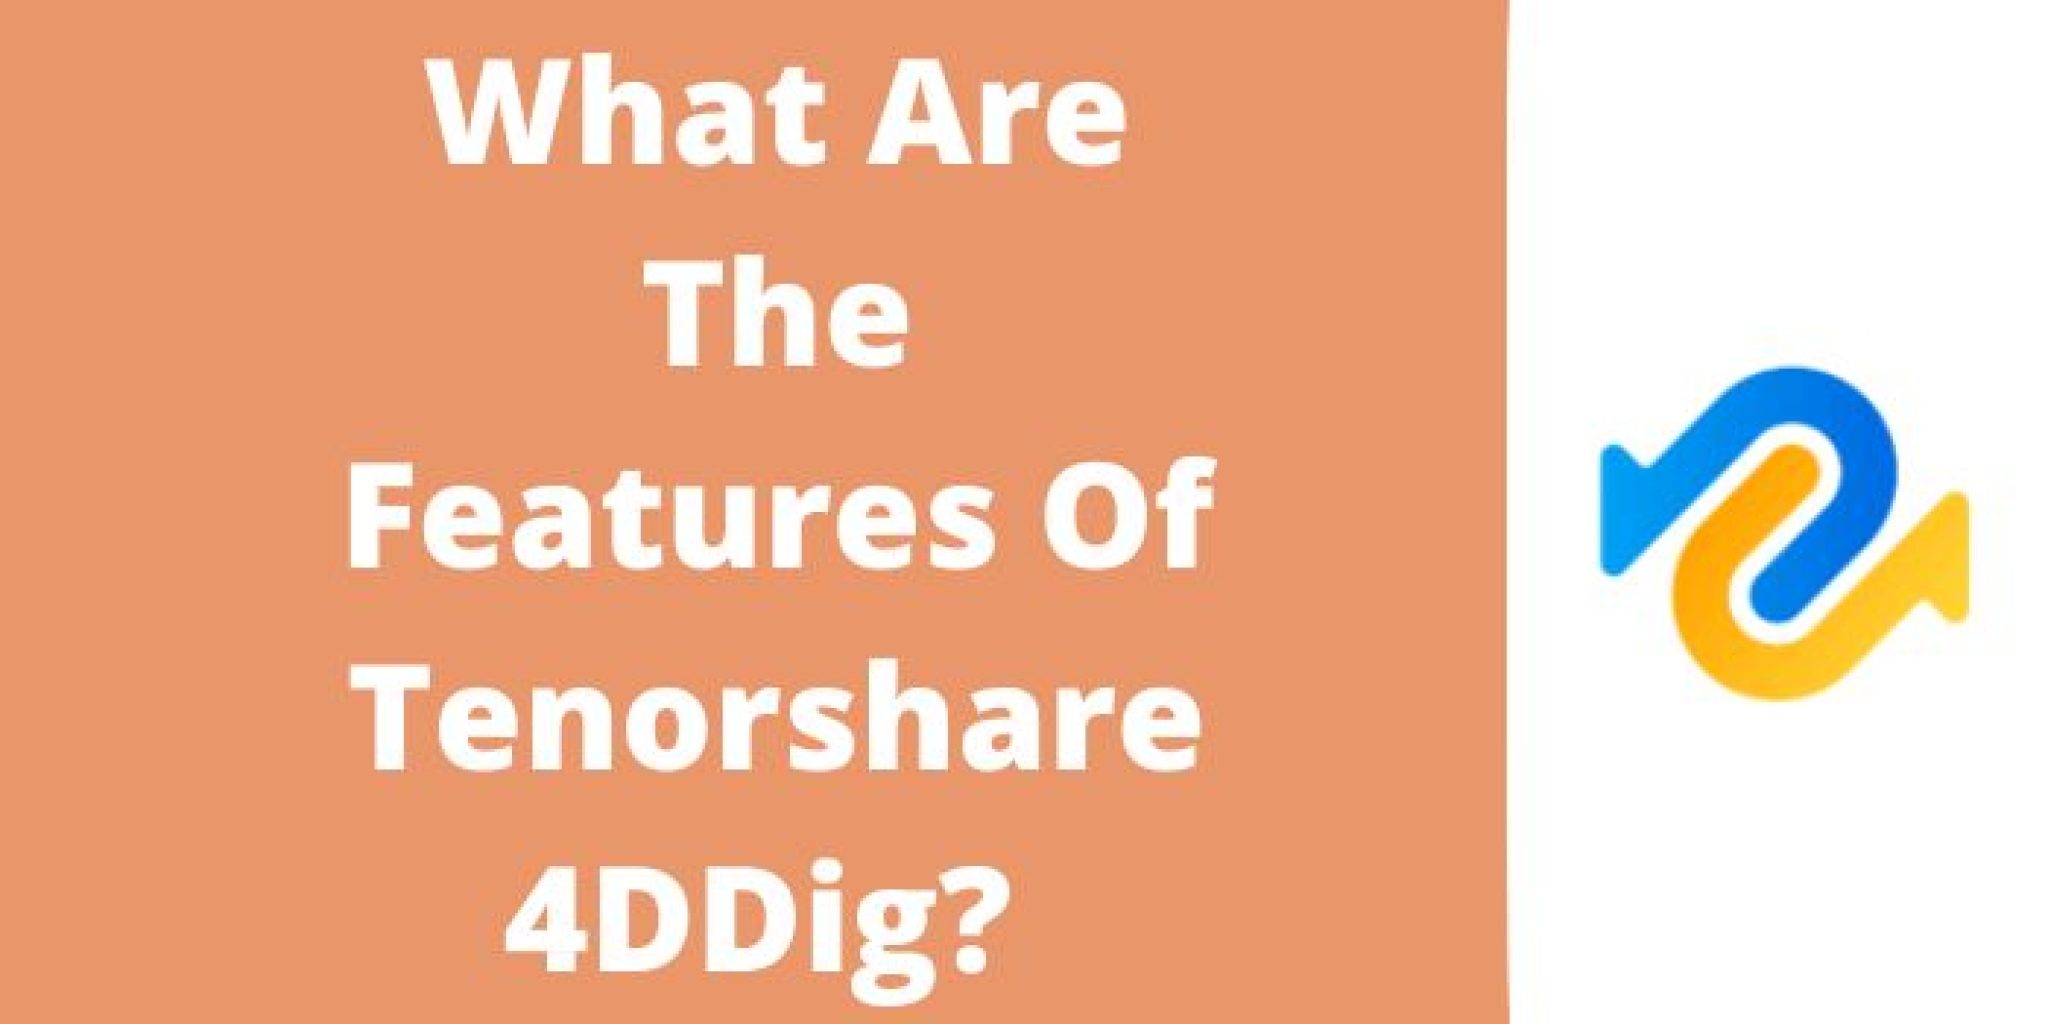 instal the new version for mac Tenorshare 4DDiG 9.6.1.8